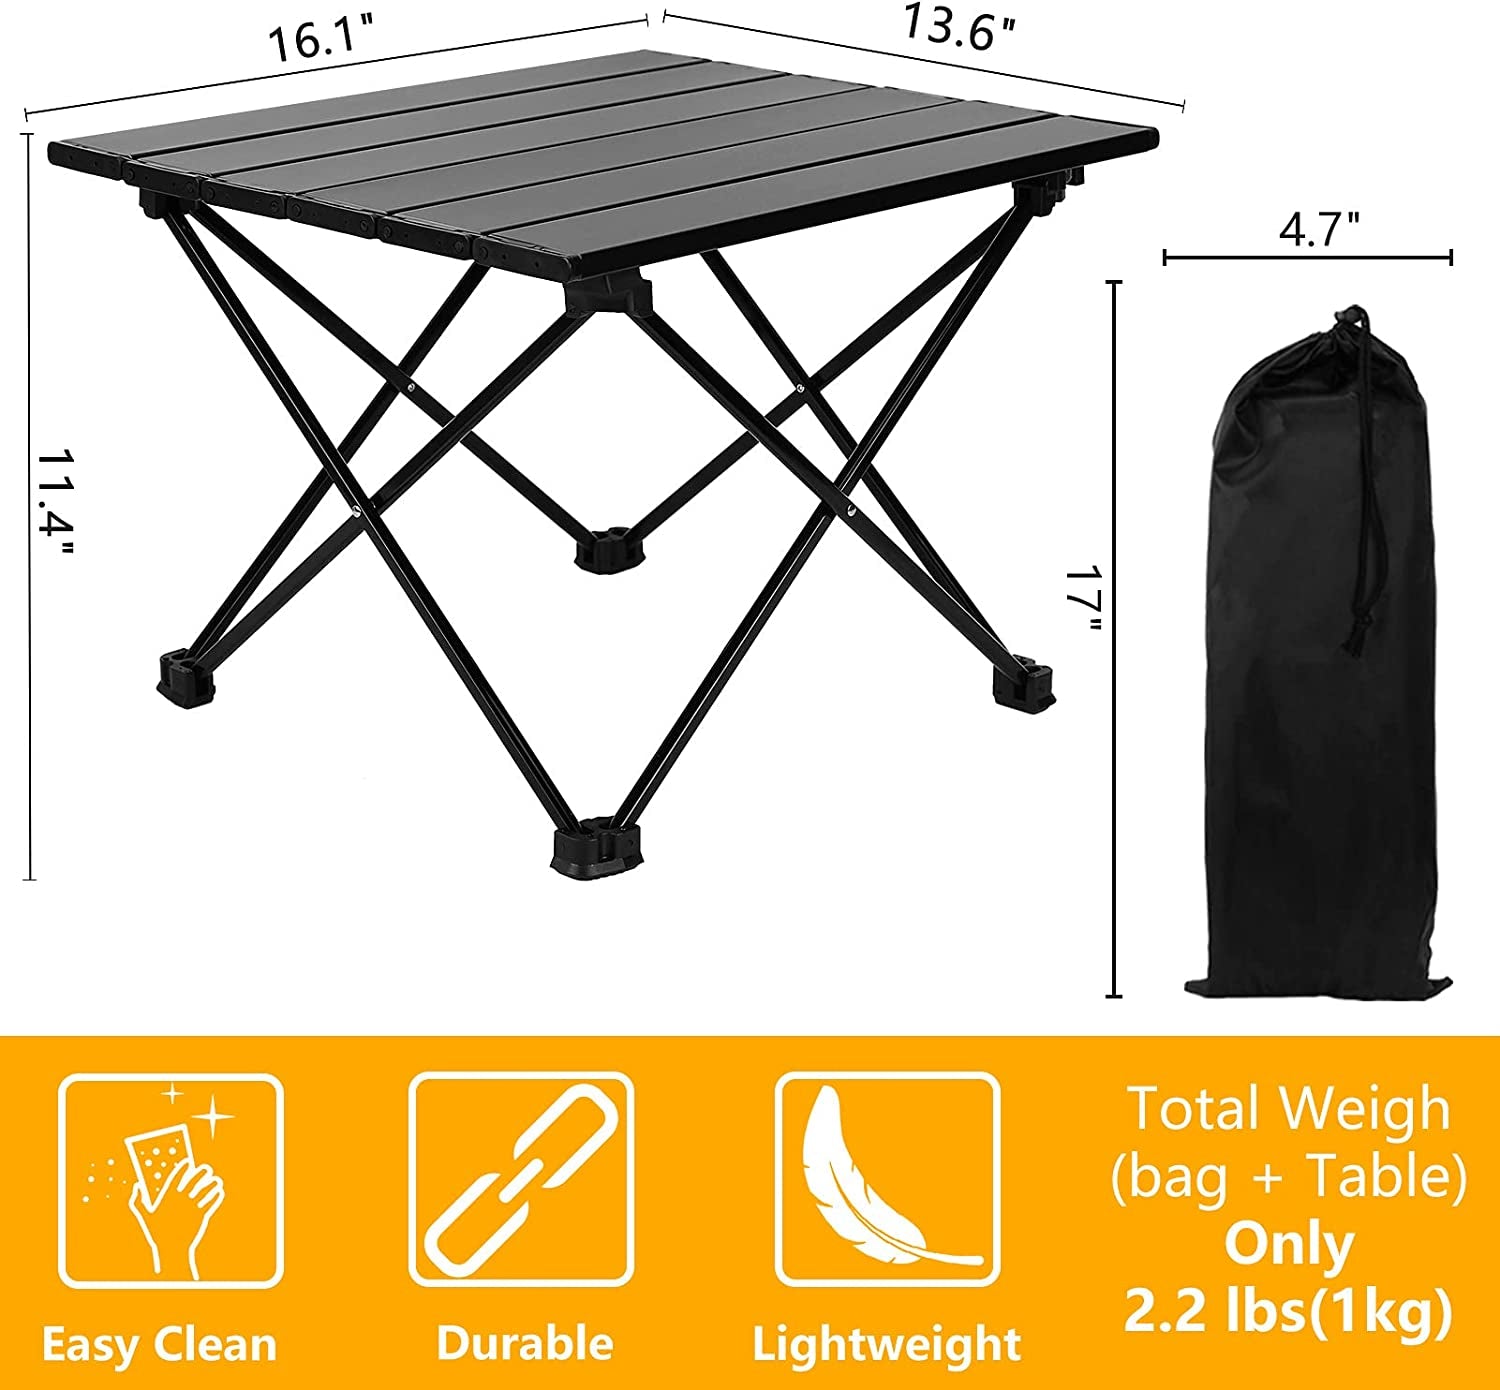 Portable Camping Table Folding Beach Table Portable Picnic Table Aluminum Camp Table Outdoor Backpacking Table Personal Mini Portable Table Camping Tables Fold up Lightweight